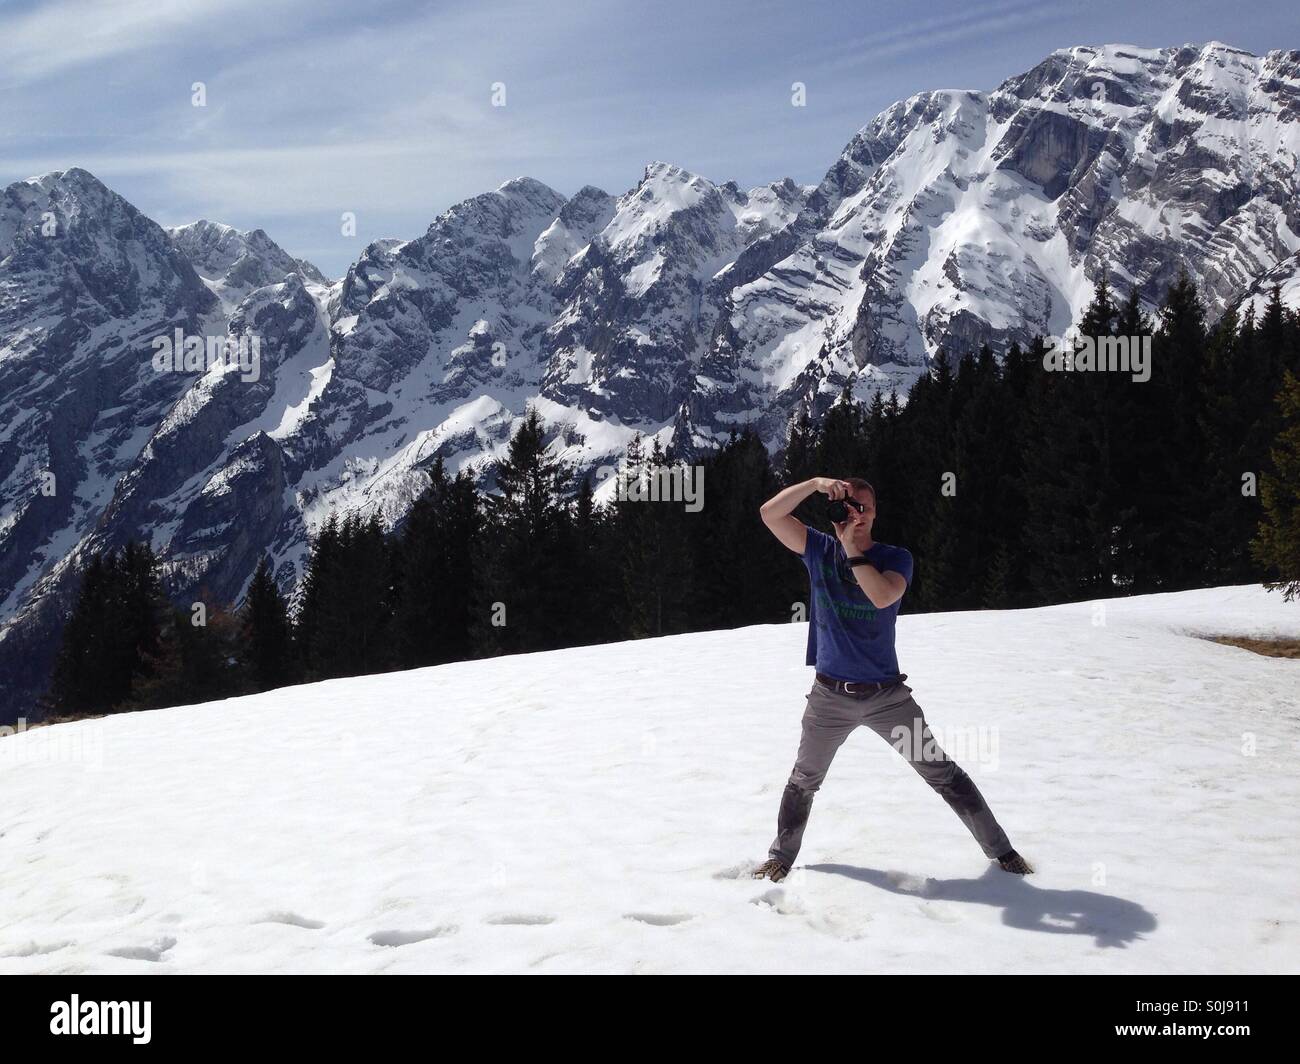 photographer and snowy mountains in germany Stock Photo